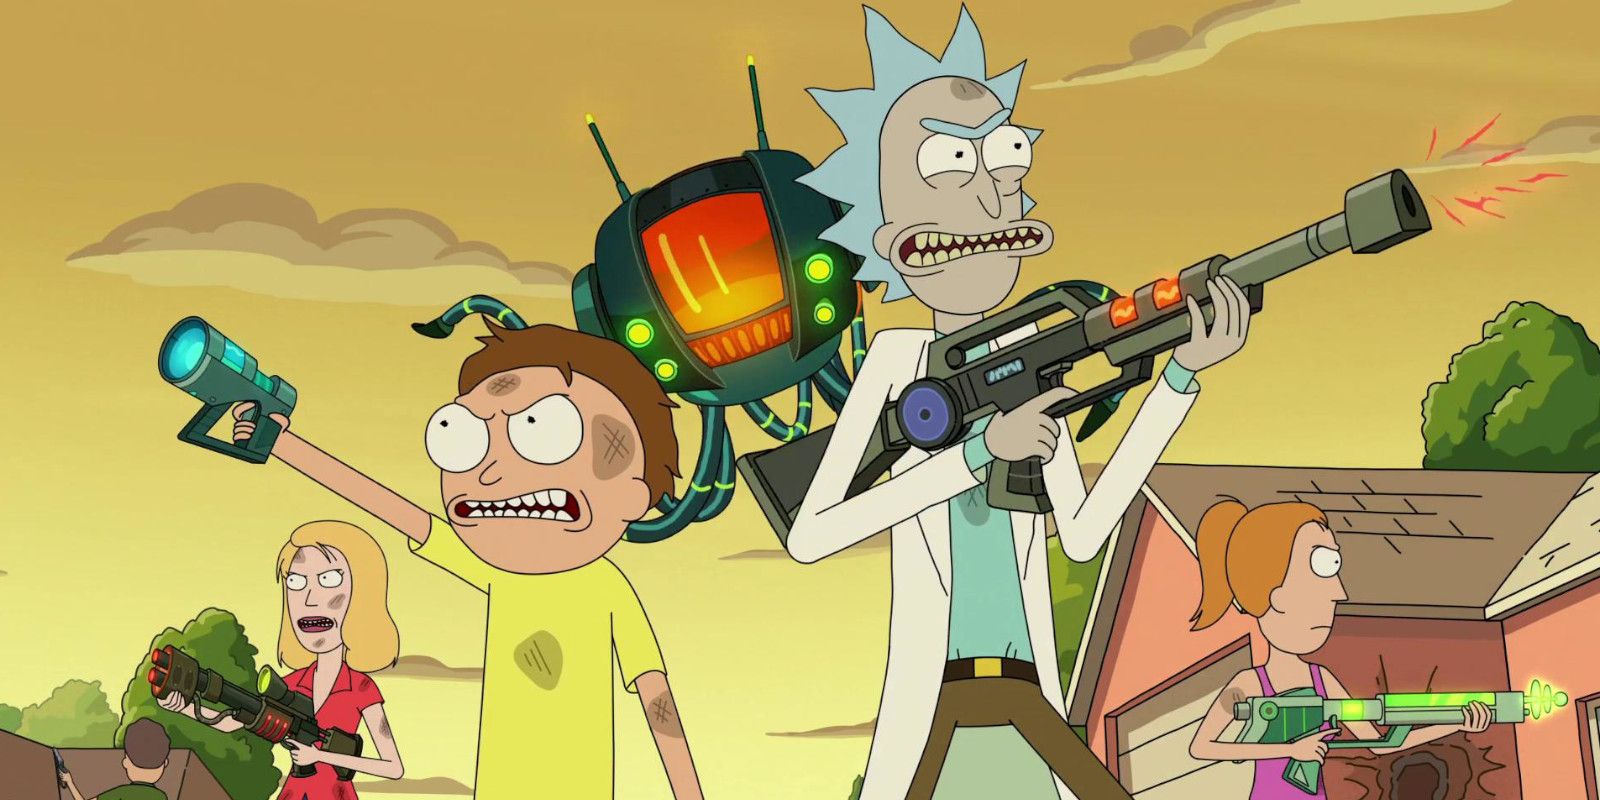 Rick, Morty, Summer and Beth in Rick and Morty season 5